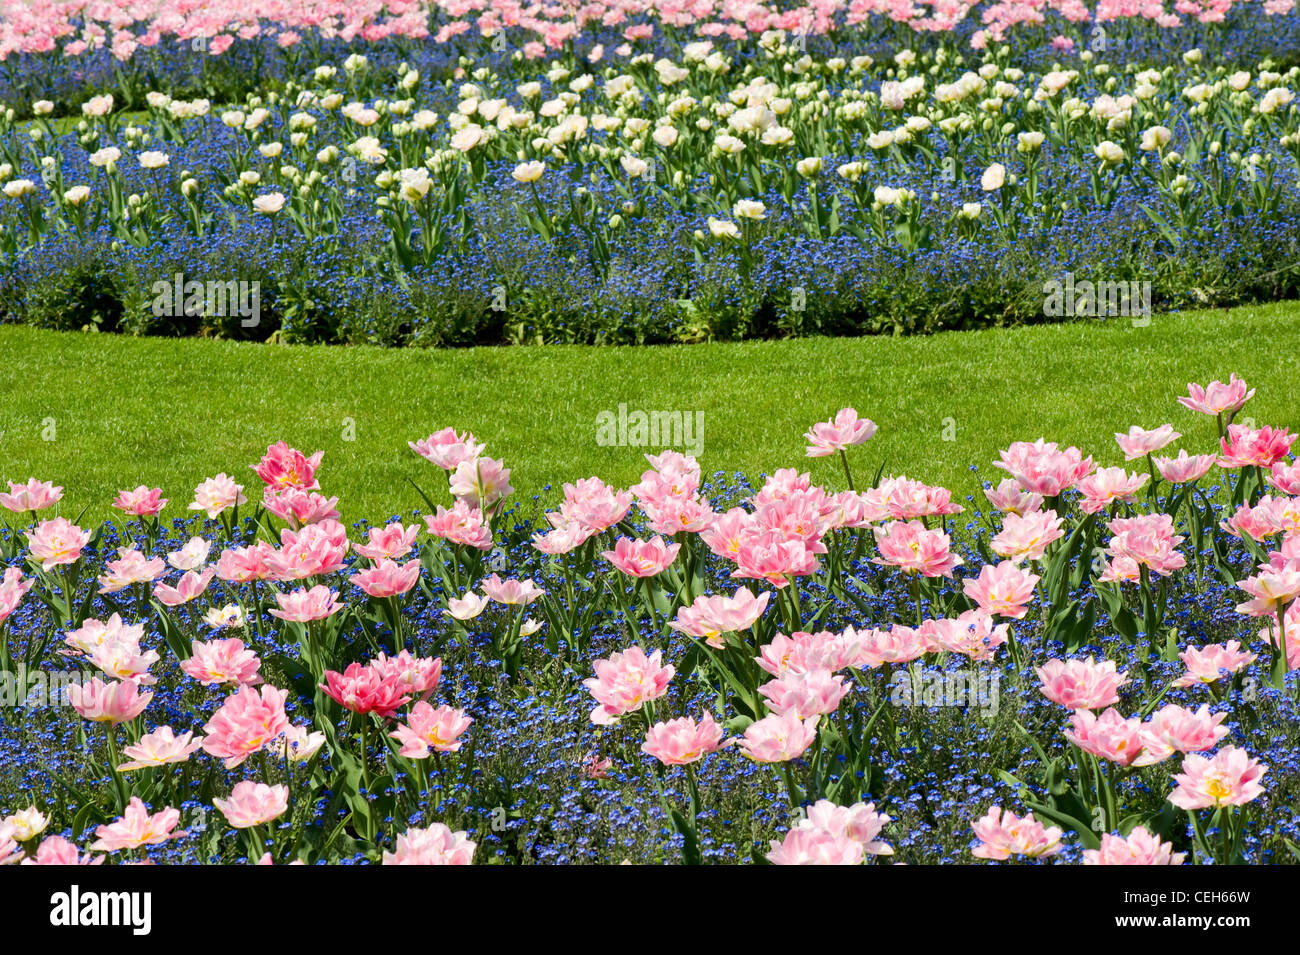 Pink Foxtrot tulips with blue forget-me-nots mix Stock Photo